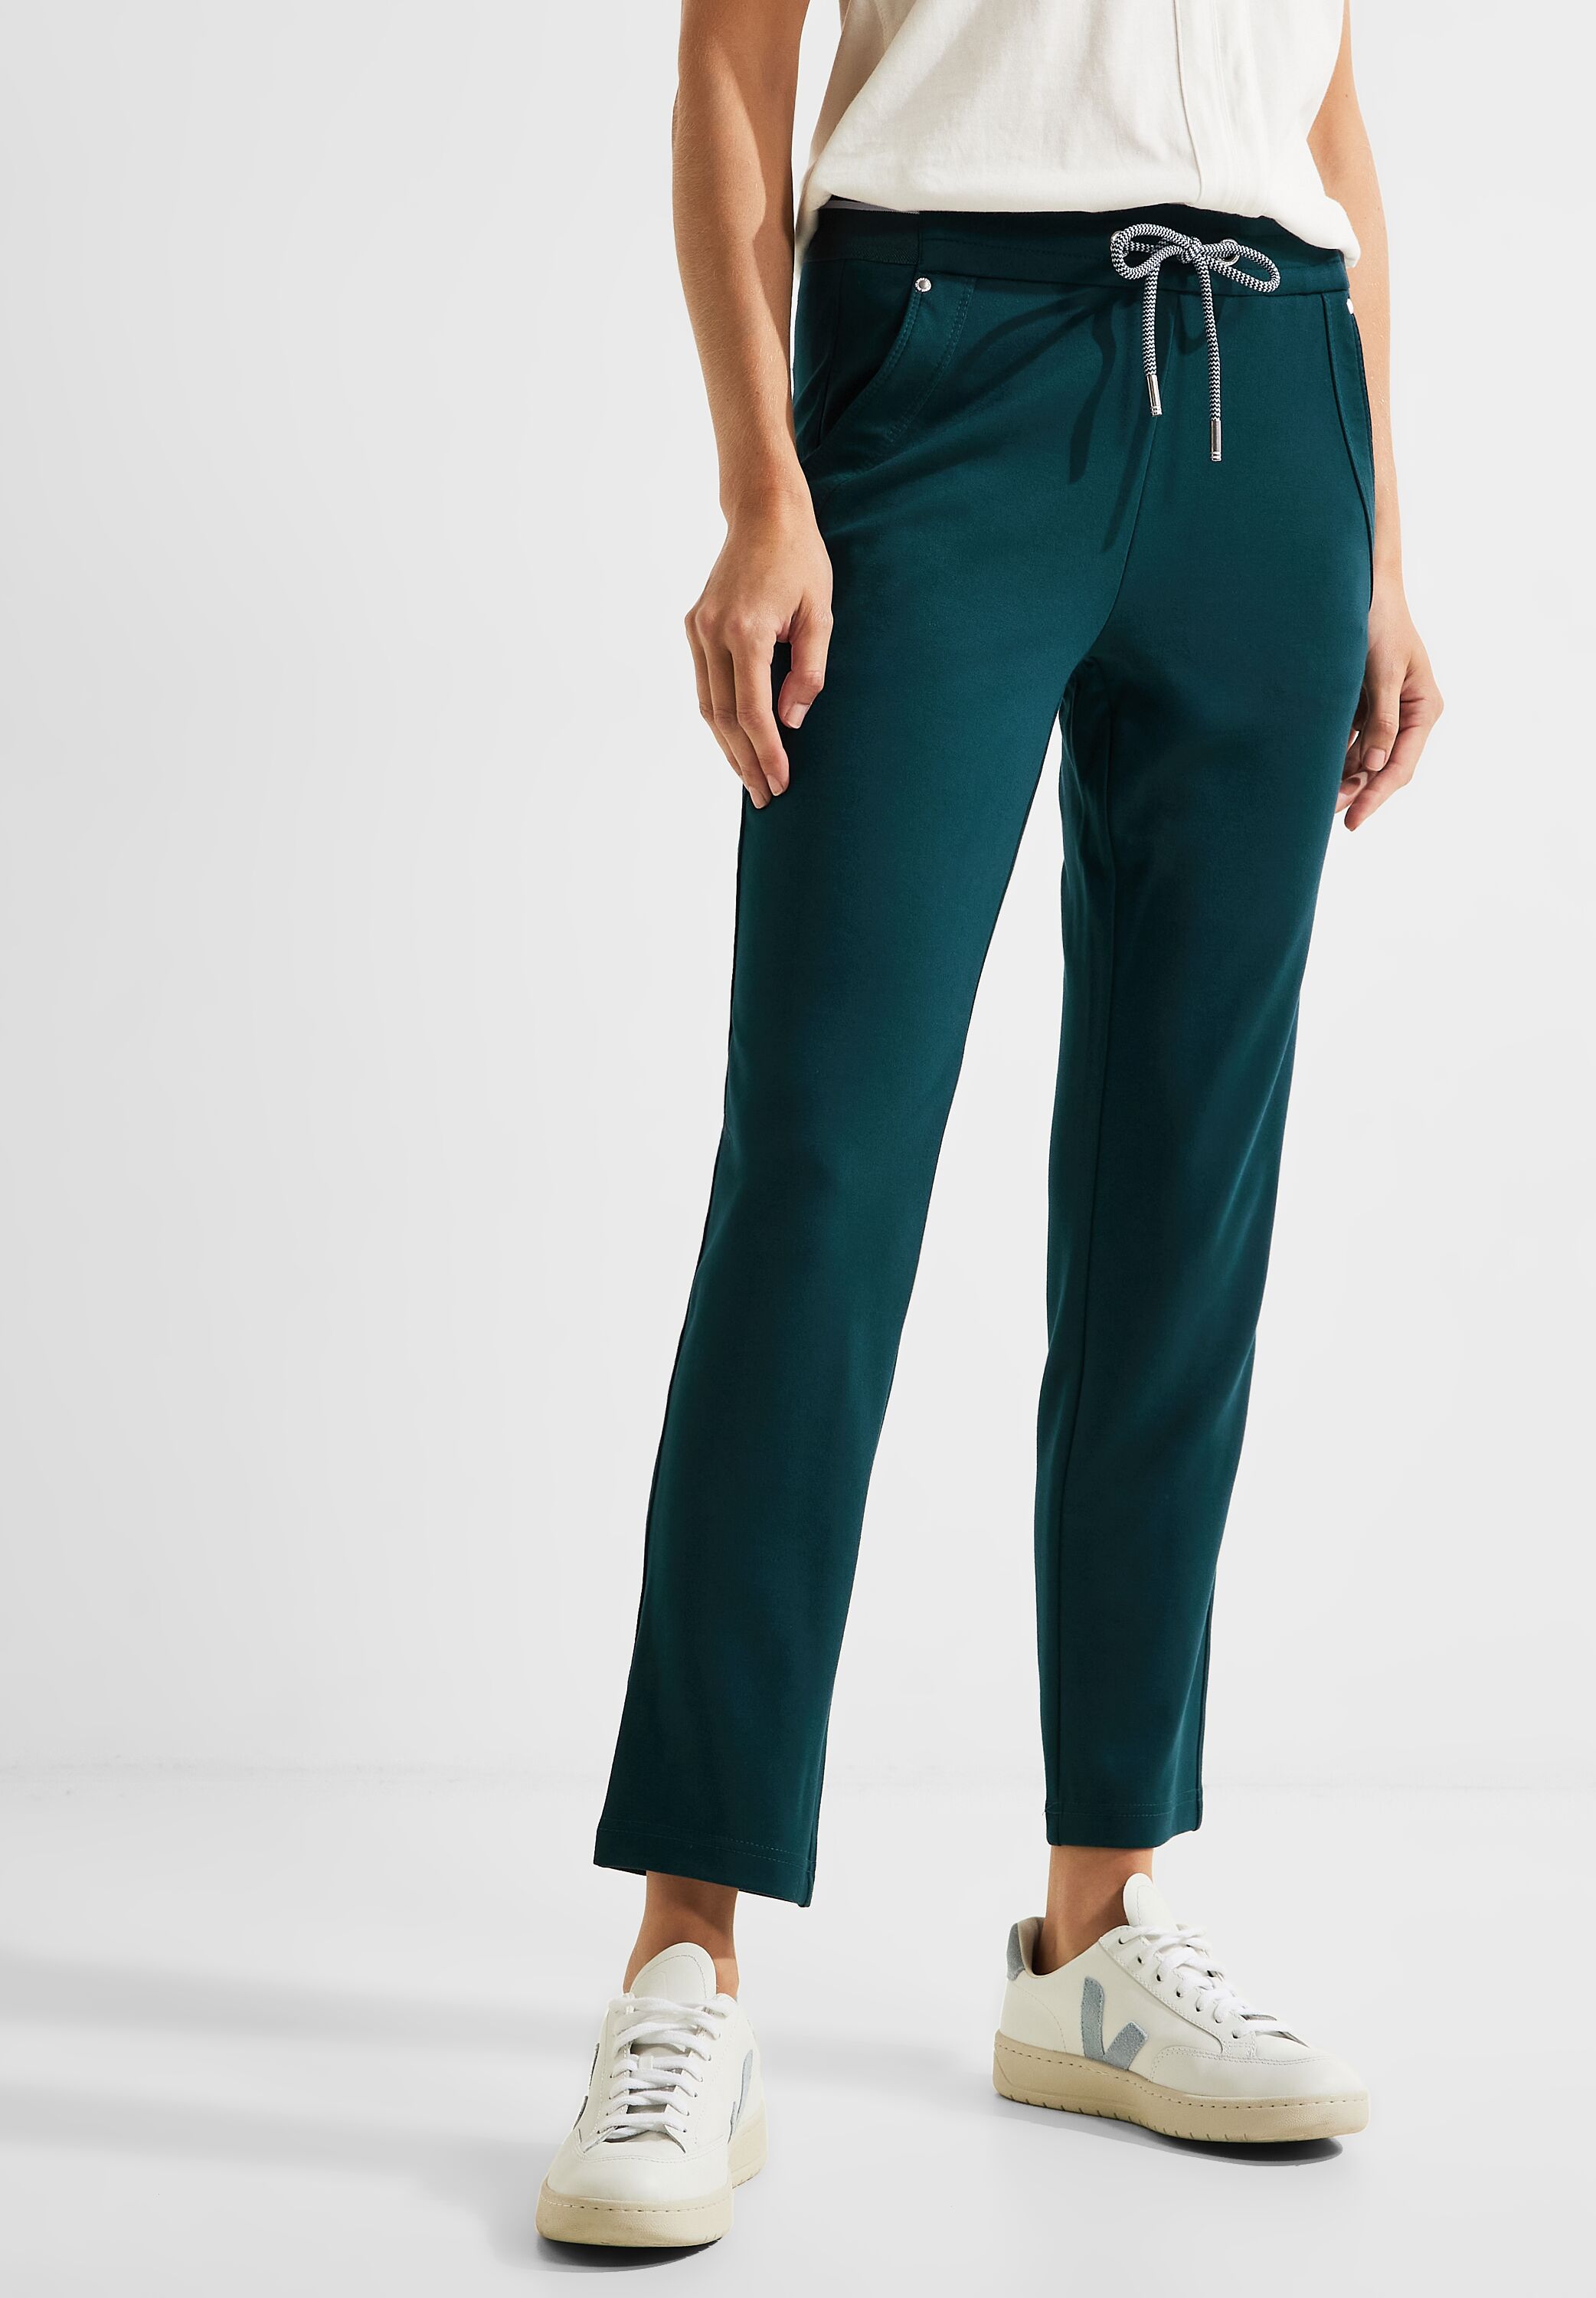 CECIL Joggpant Tracey in Green Mode Lake B376689-14926 im Deep reduziert - CONCEPT SALE